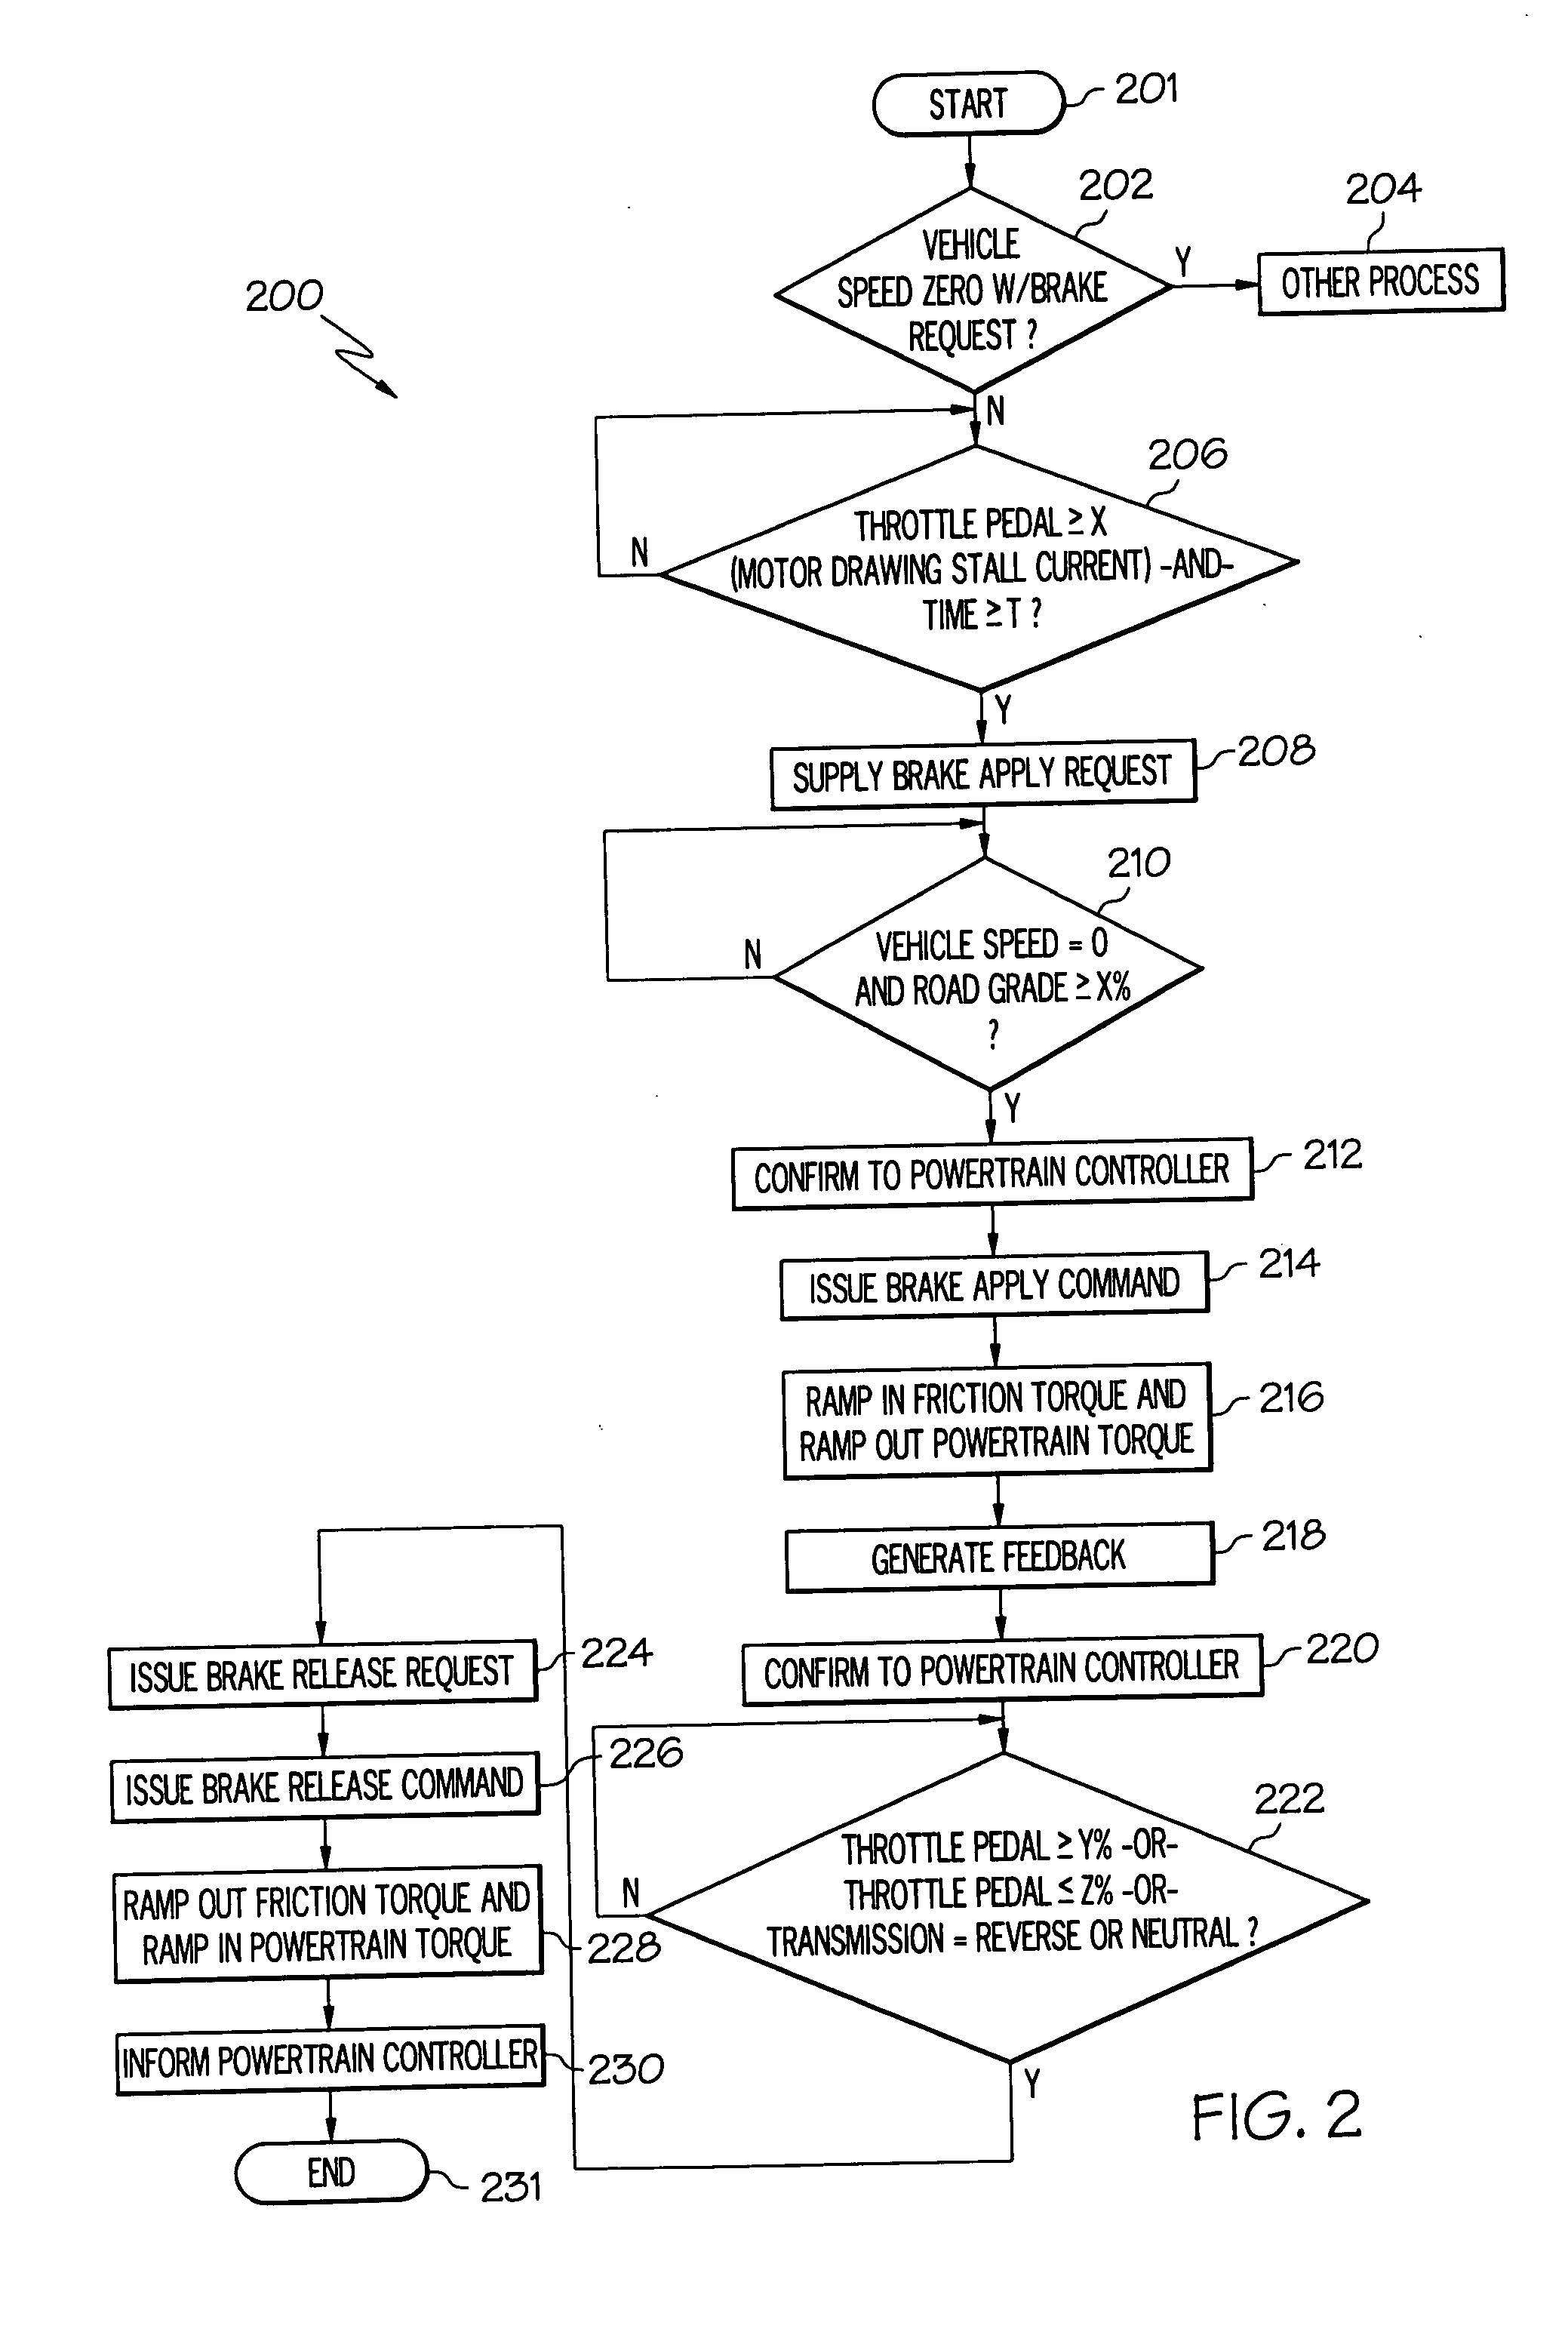 System and method for maintaining a vehicle at zero speed on a graded surface